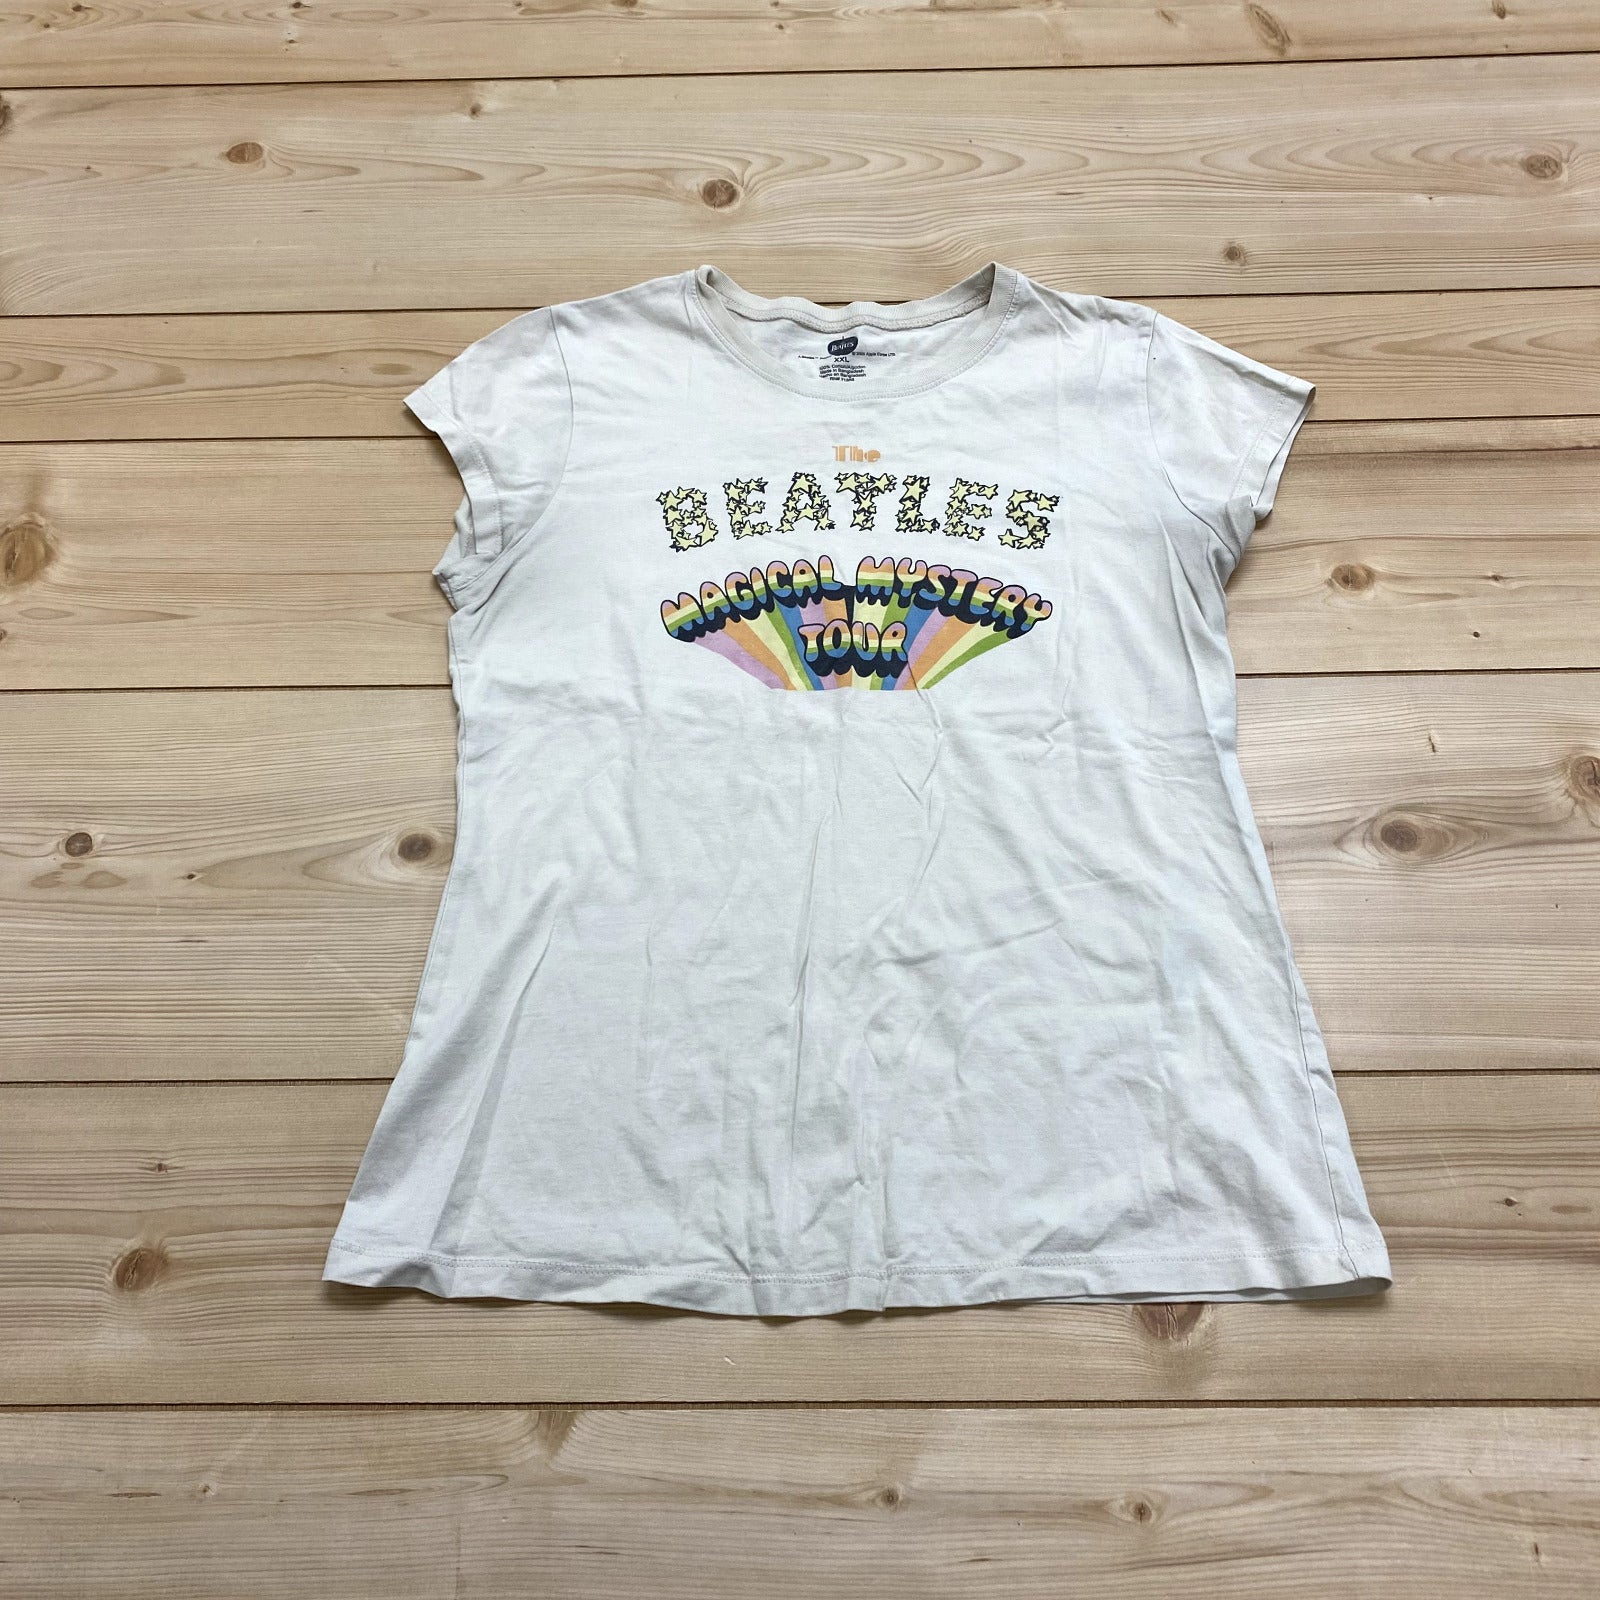 Apple Corps Tan Beatles Magical Mystery Tour Short Sleeve T-Shirt Youth Size XXL